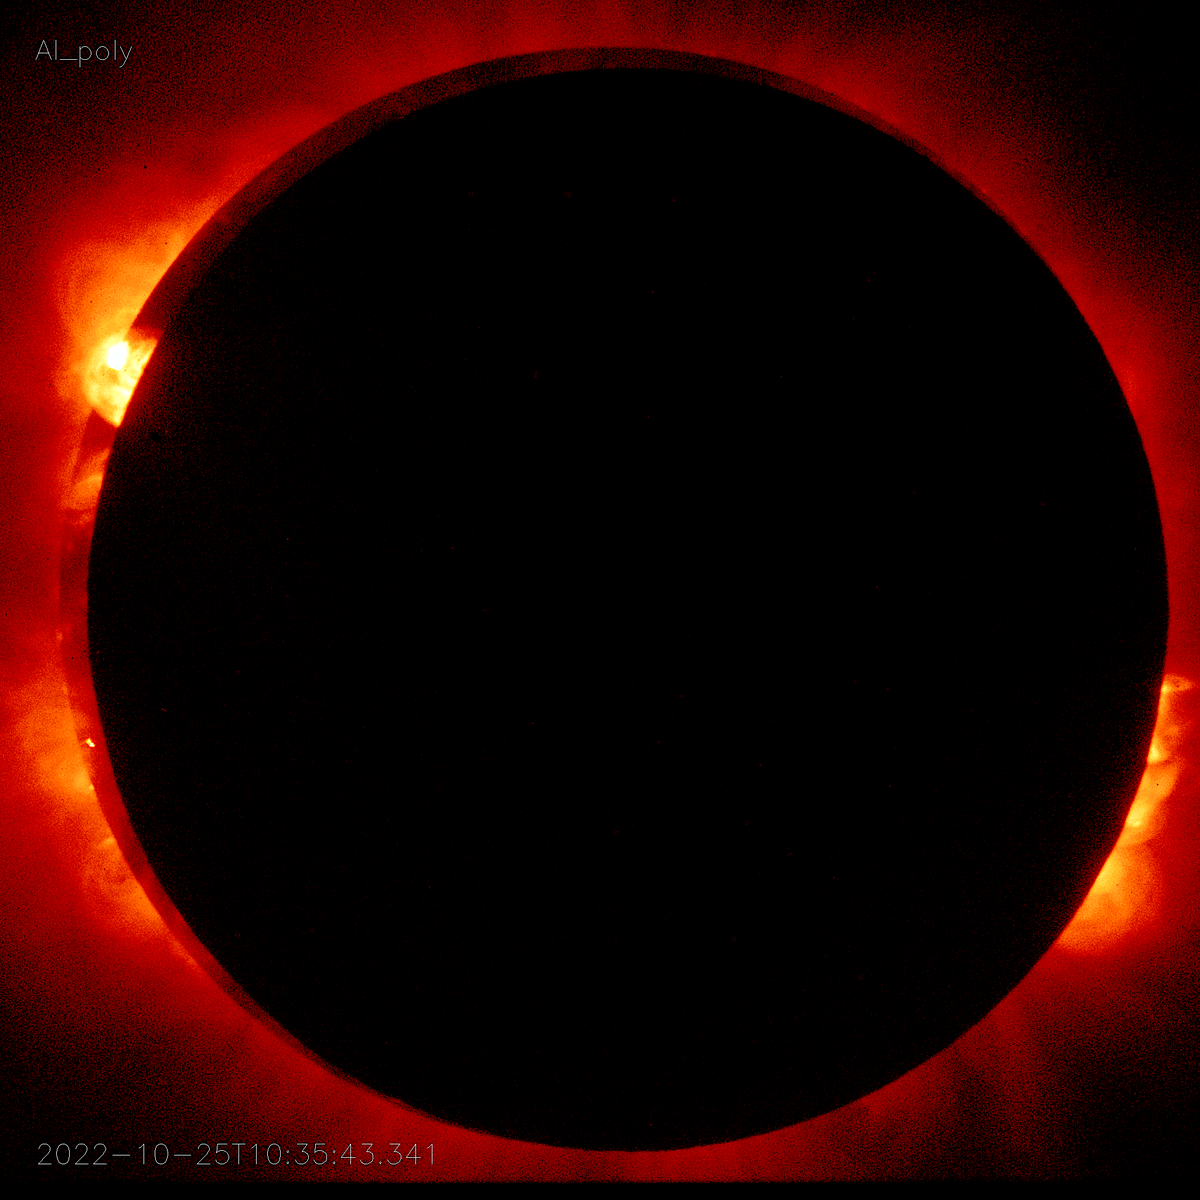 The Japanese Space Agency’s Hinode spacecraft captured images of an annular solar eclipse using its X-ray telescope on 25 October, 2022 (JAXA/NASA/Smithsonian Astrophysical Observatory)